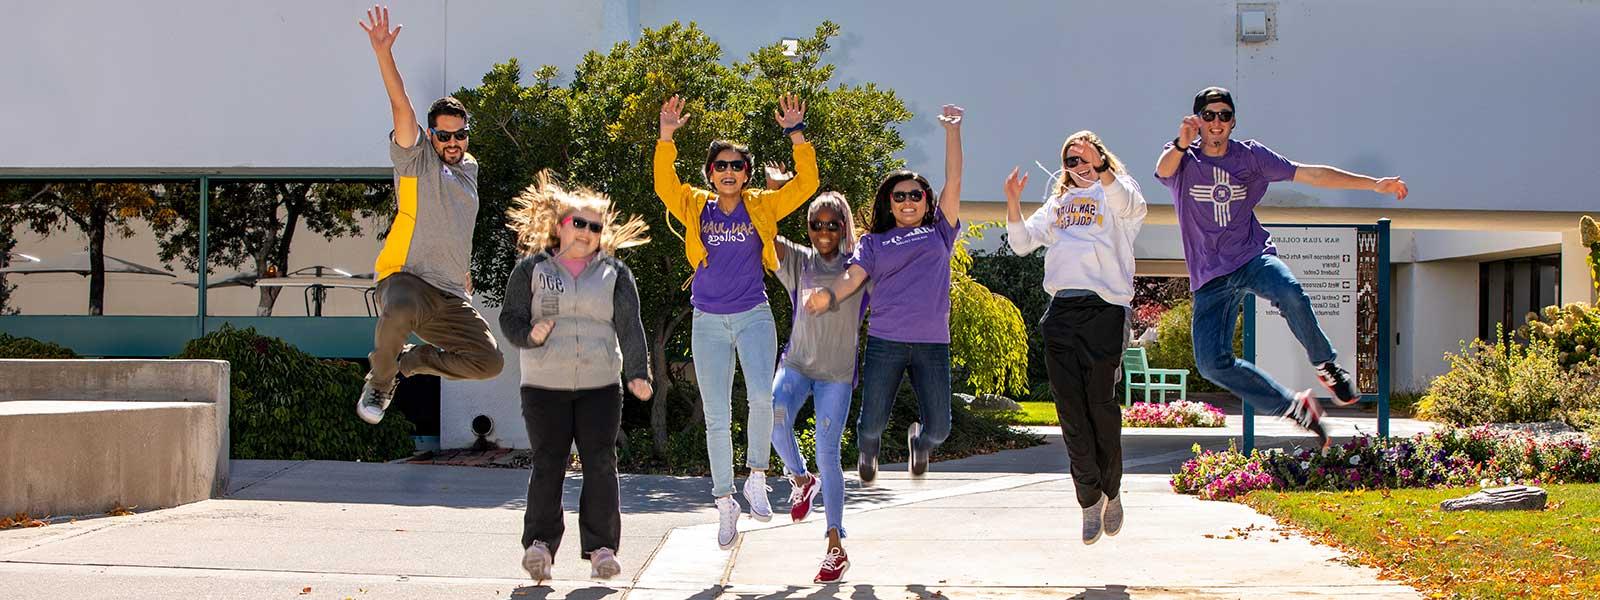 Students outside jumping with hands in air and smiling at camera